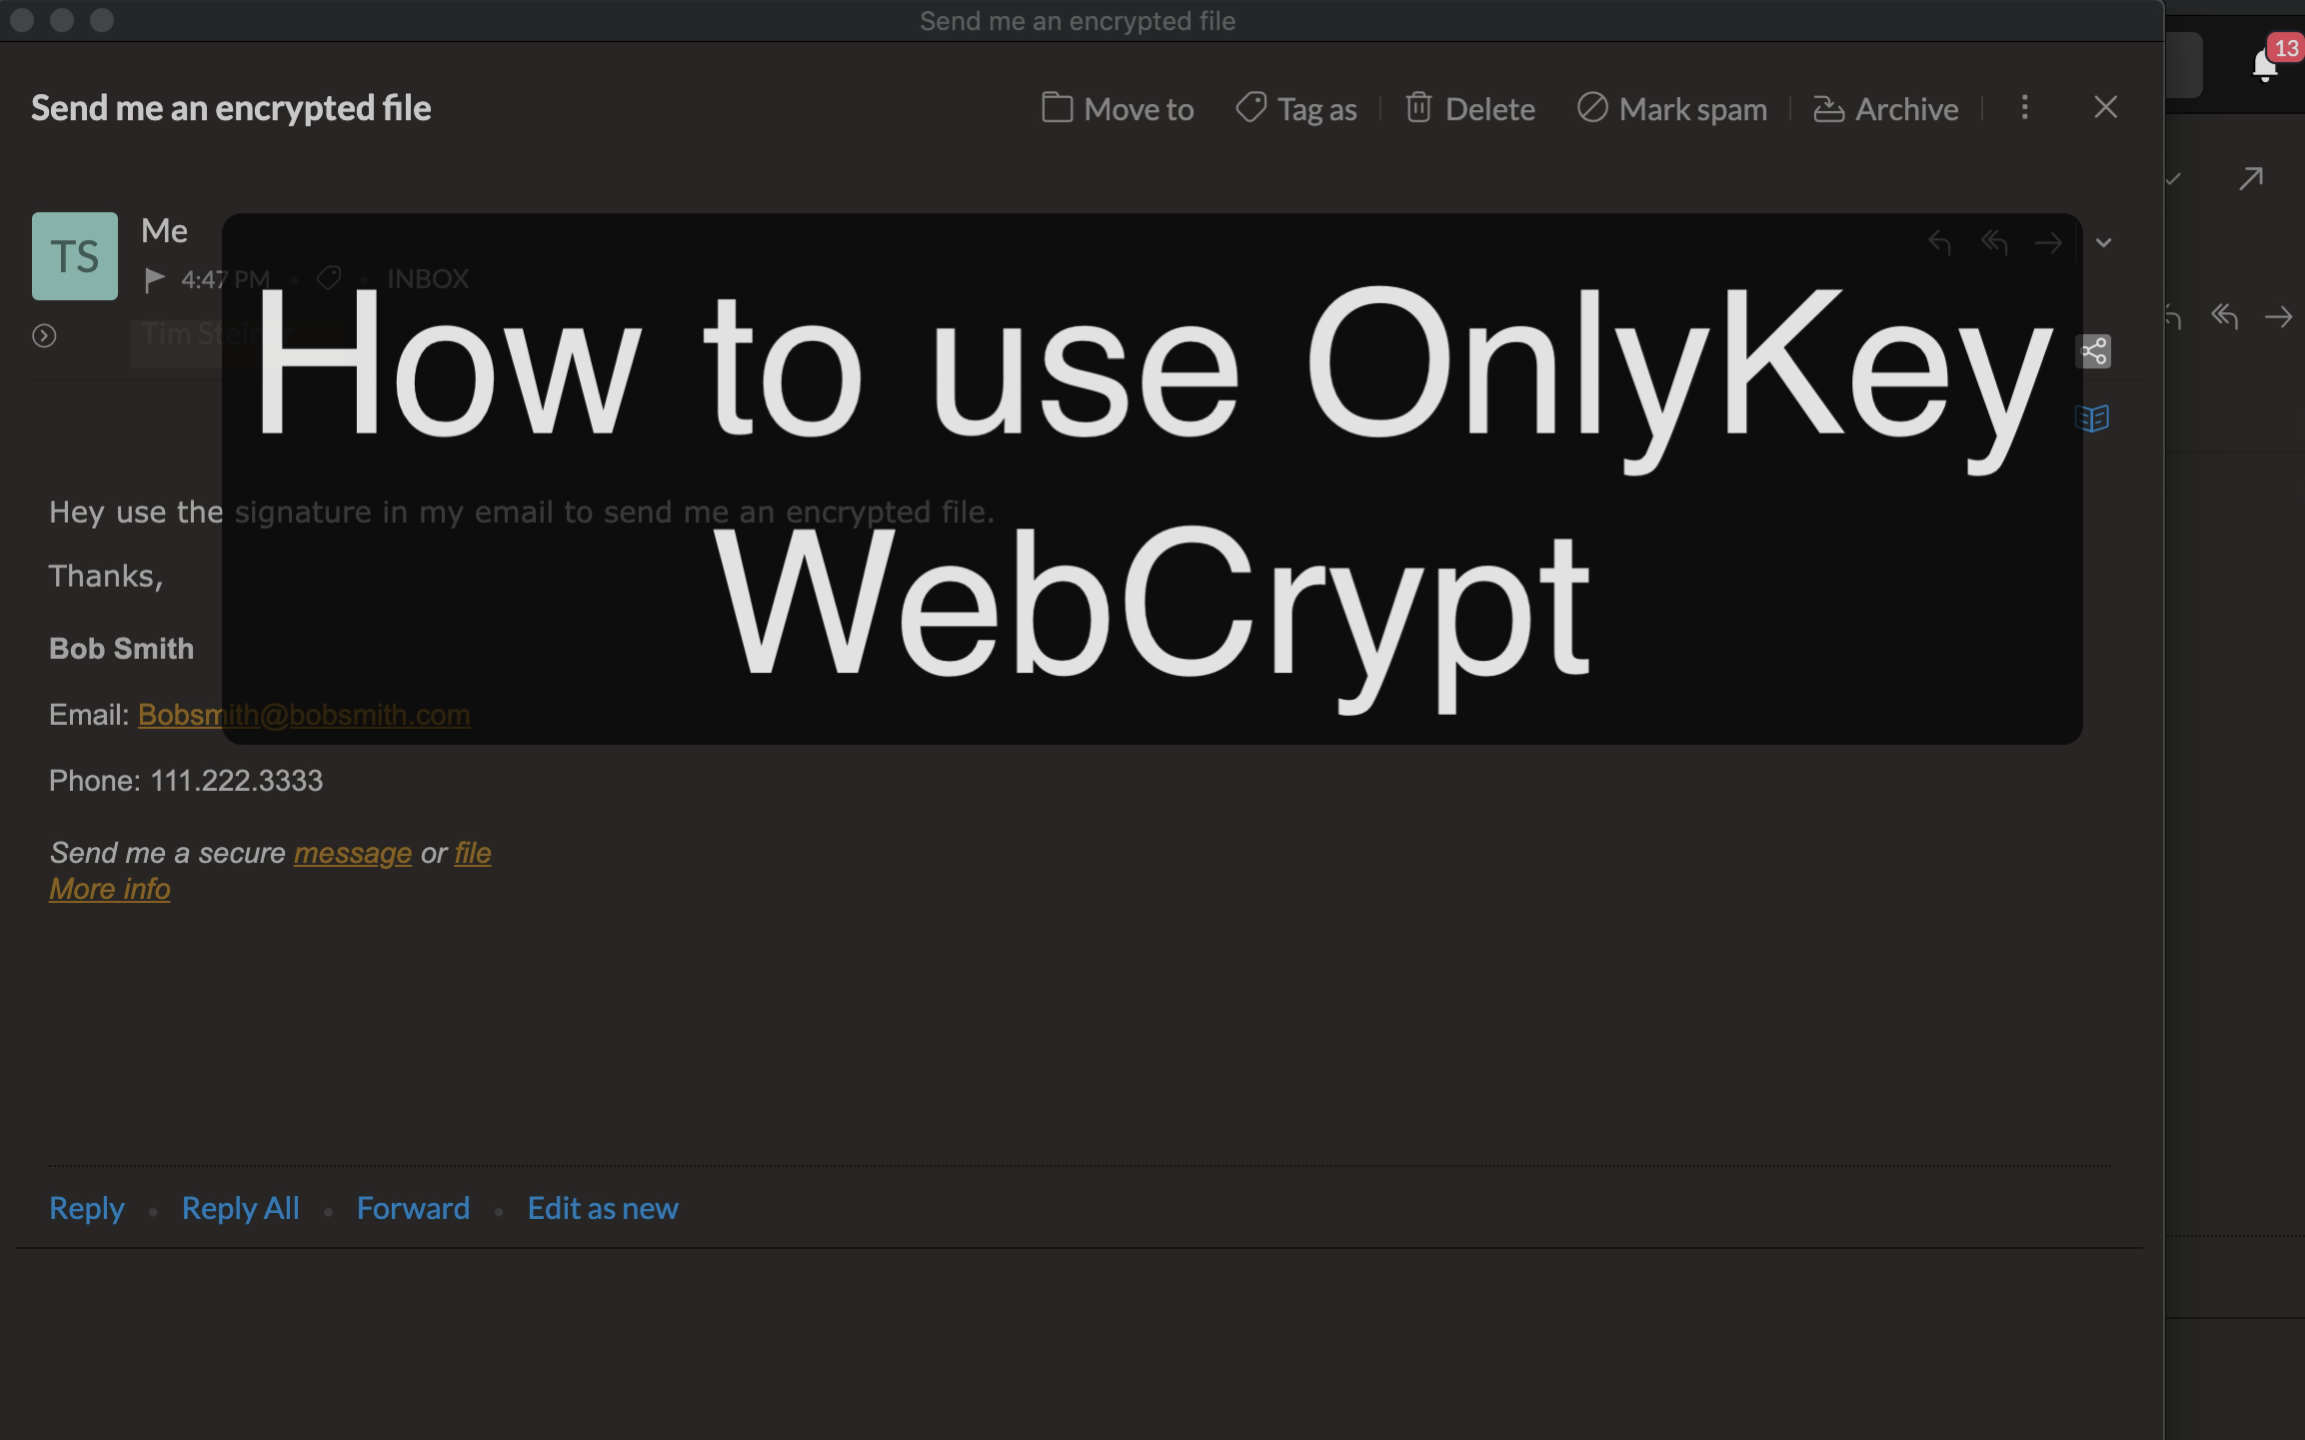 How-To: Use OnlyKey WebCrypt